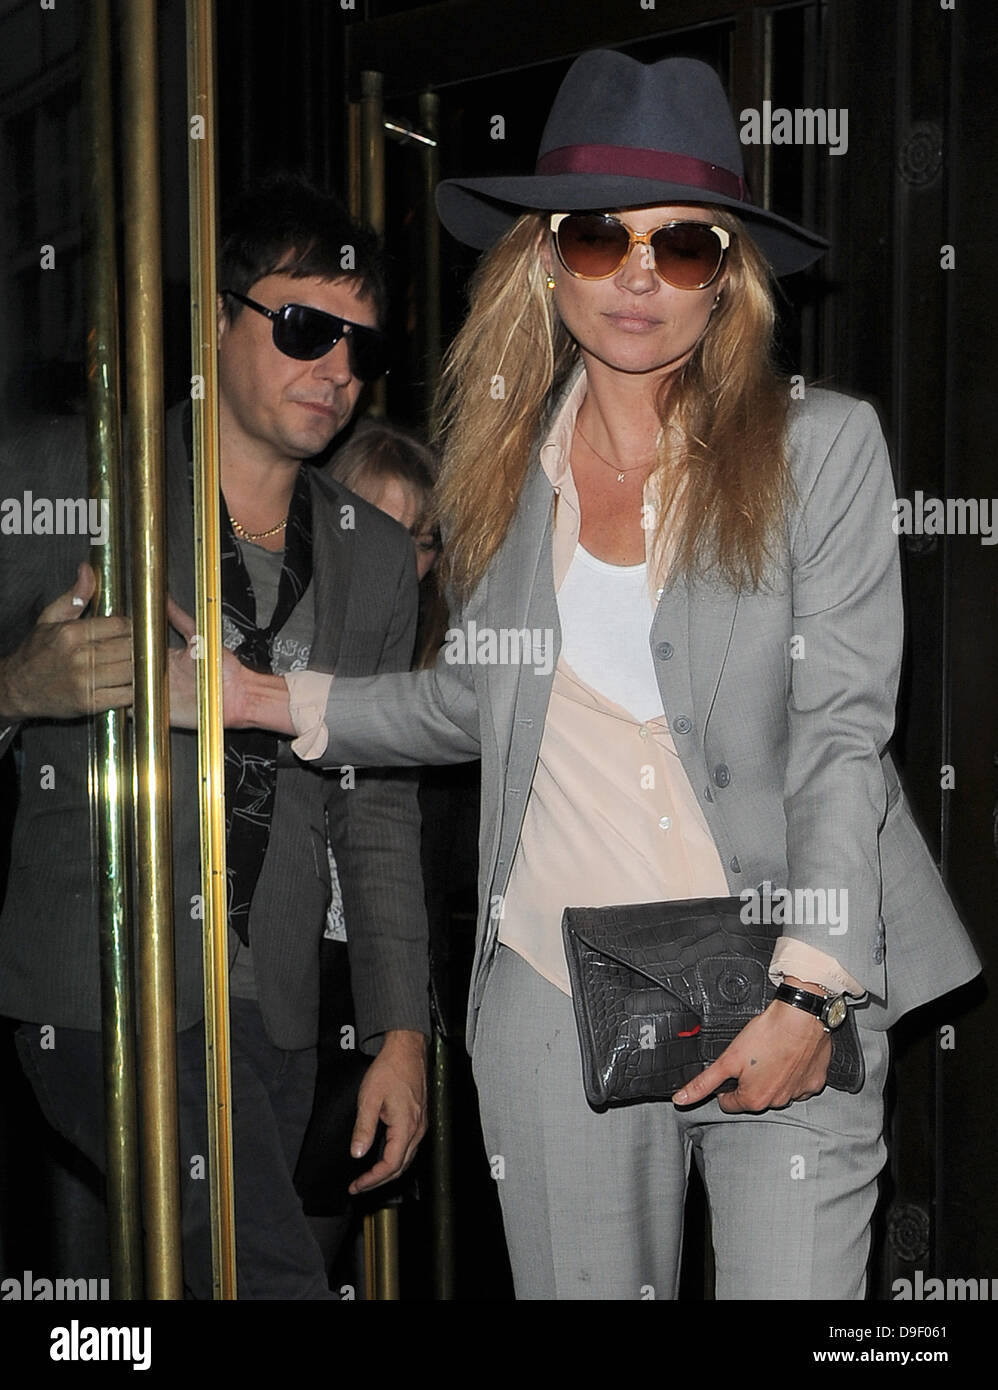 Newly engaged couple Kate Moss and Jamie Hince leave The Wolseley restaurant, having enjoyed a late lunch there with friends. London, England - 23.02.11 Stock Photo